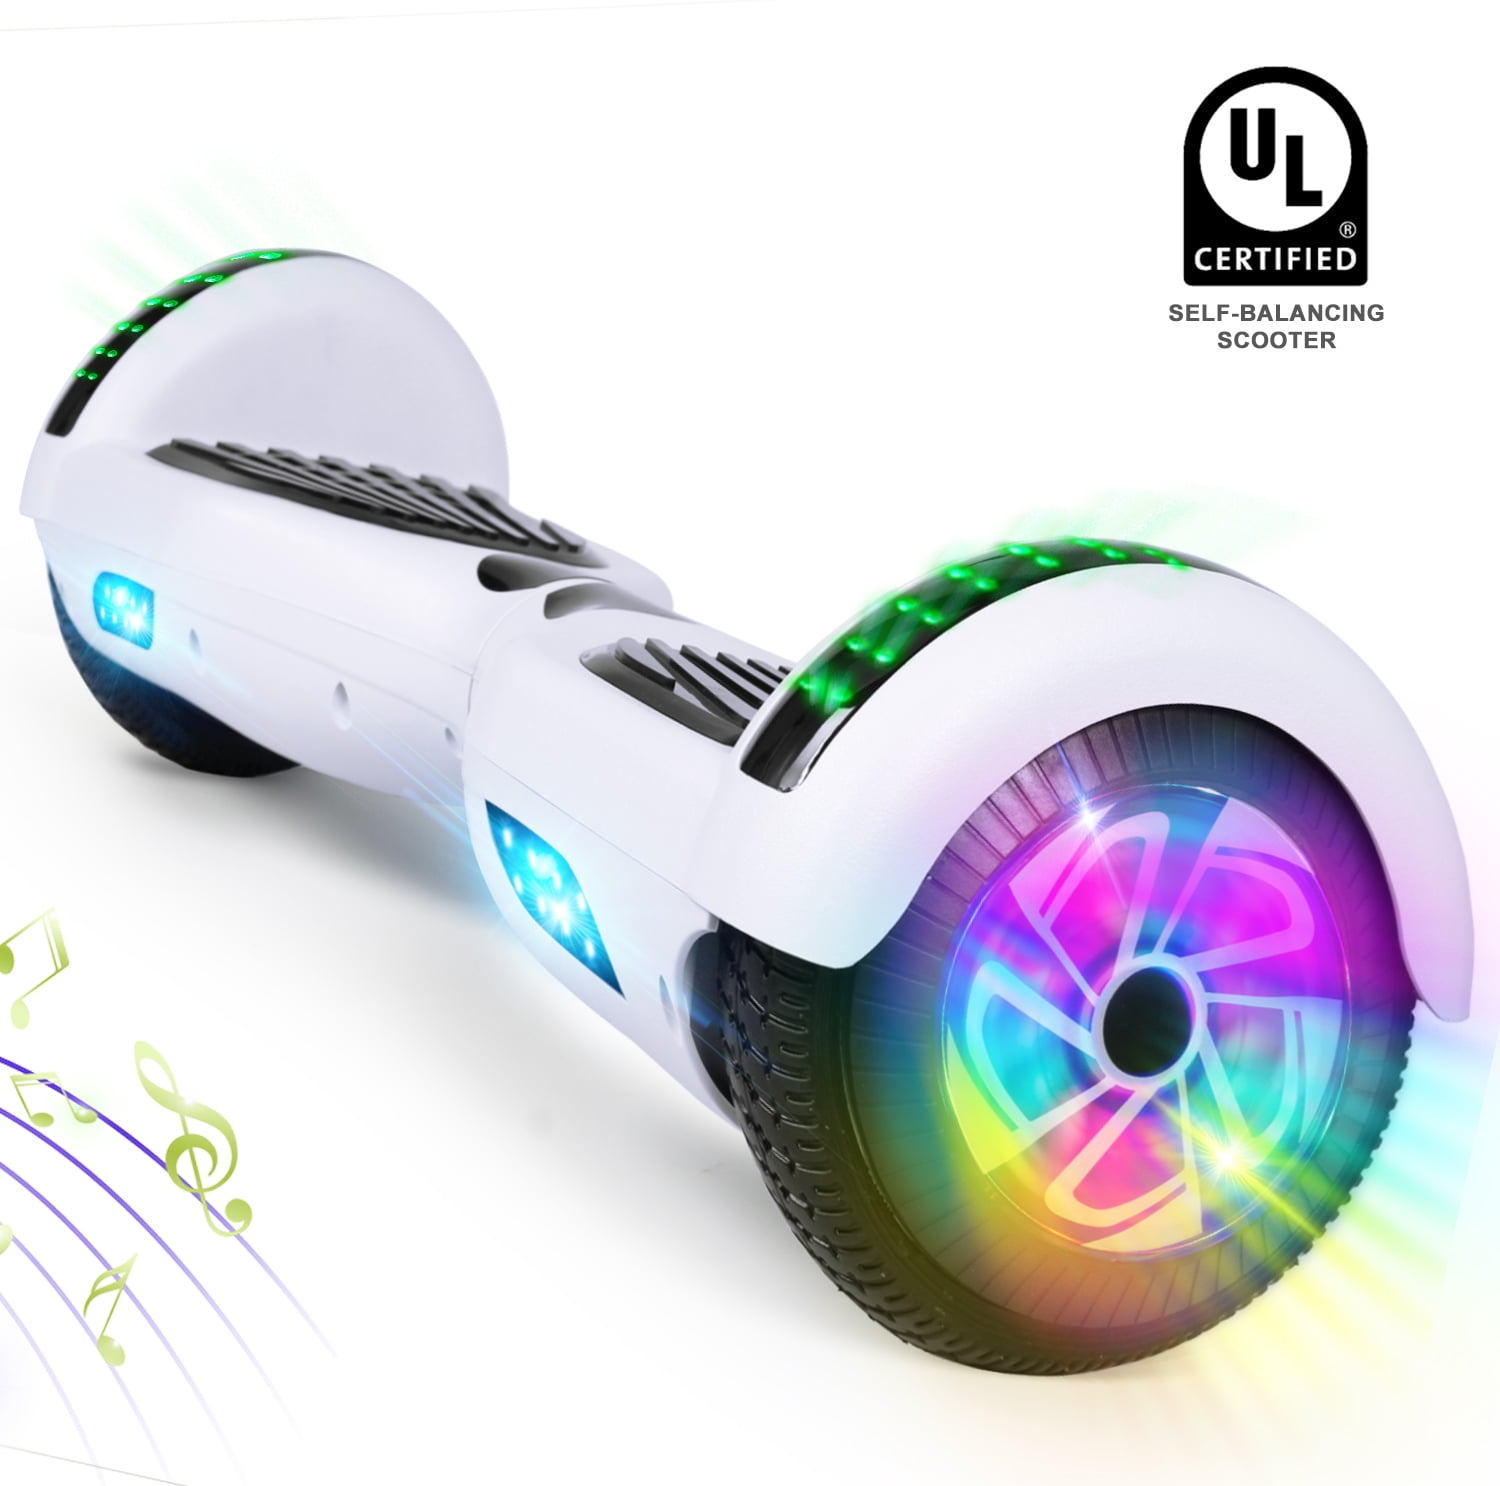 All Terrain Off Road Two-Wheel 6.5 inch Self Balancing Scooter with Bluetooth Speaker and LED Wheel for Kids Adults CBD Flash Hoverboard